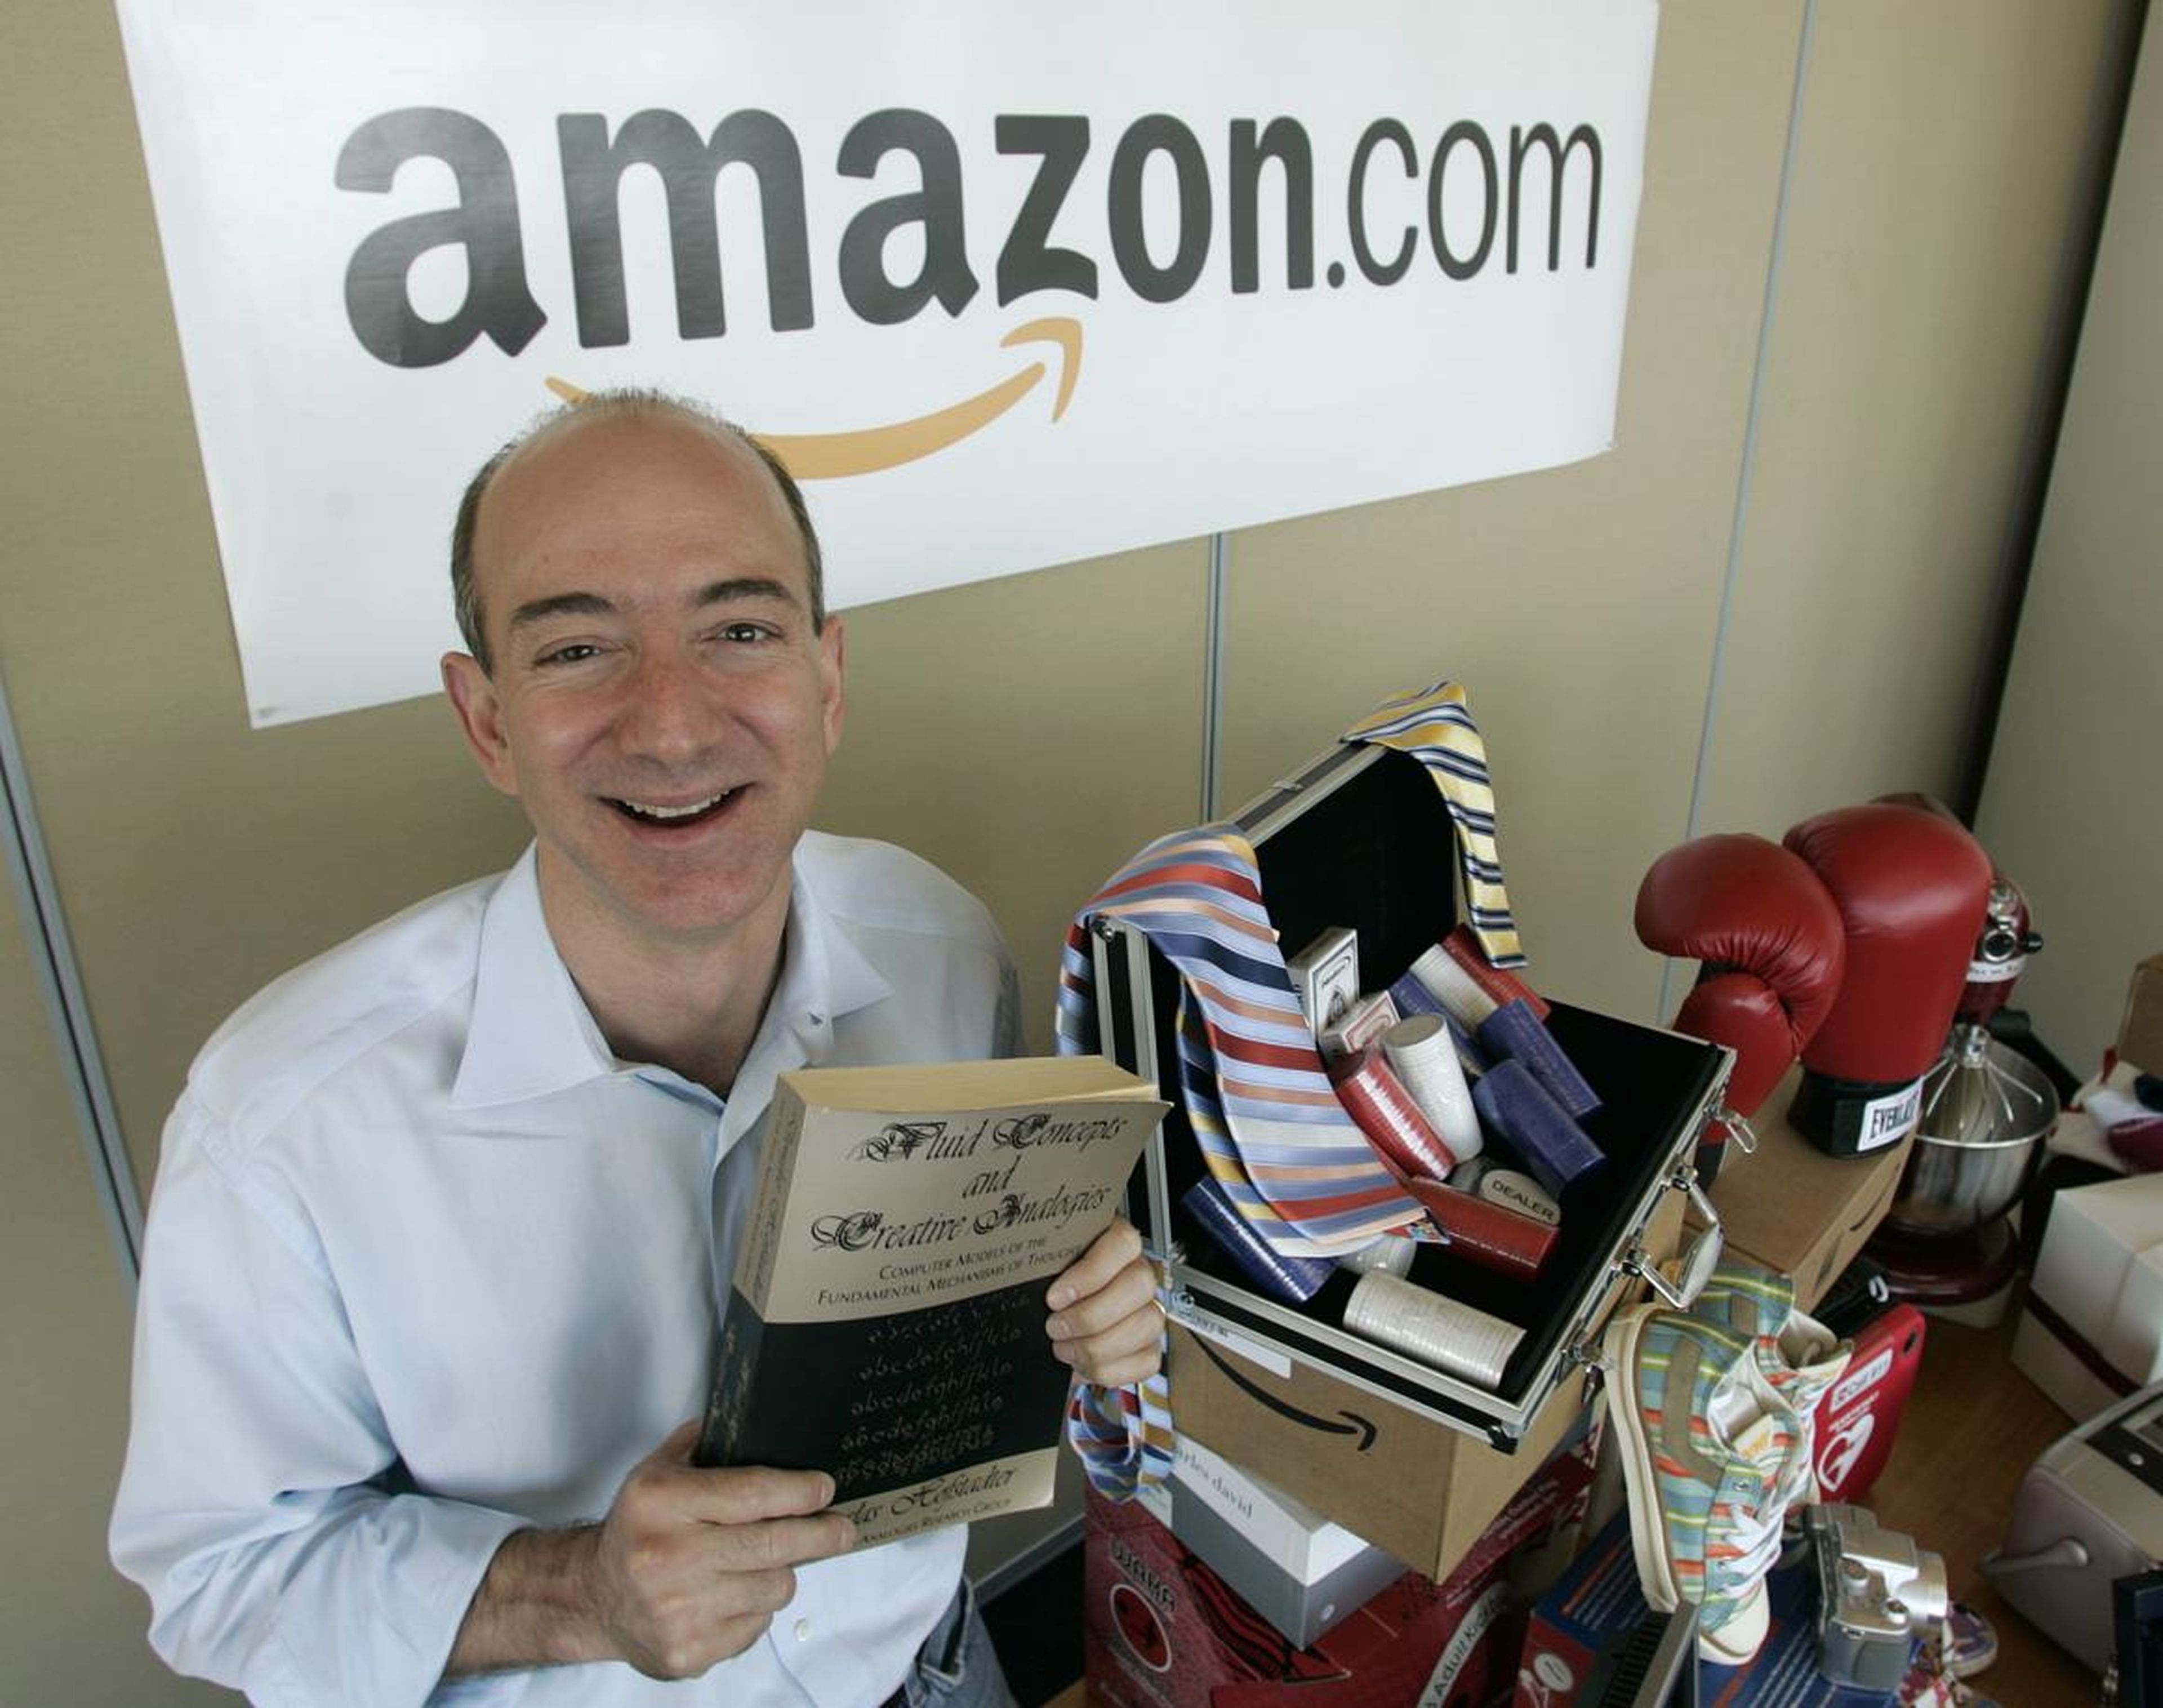 Bezos liked to move incredibly fast, which often created chaos, especially in Amazon's distribution centers.